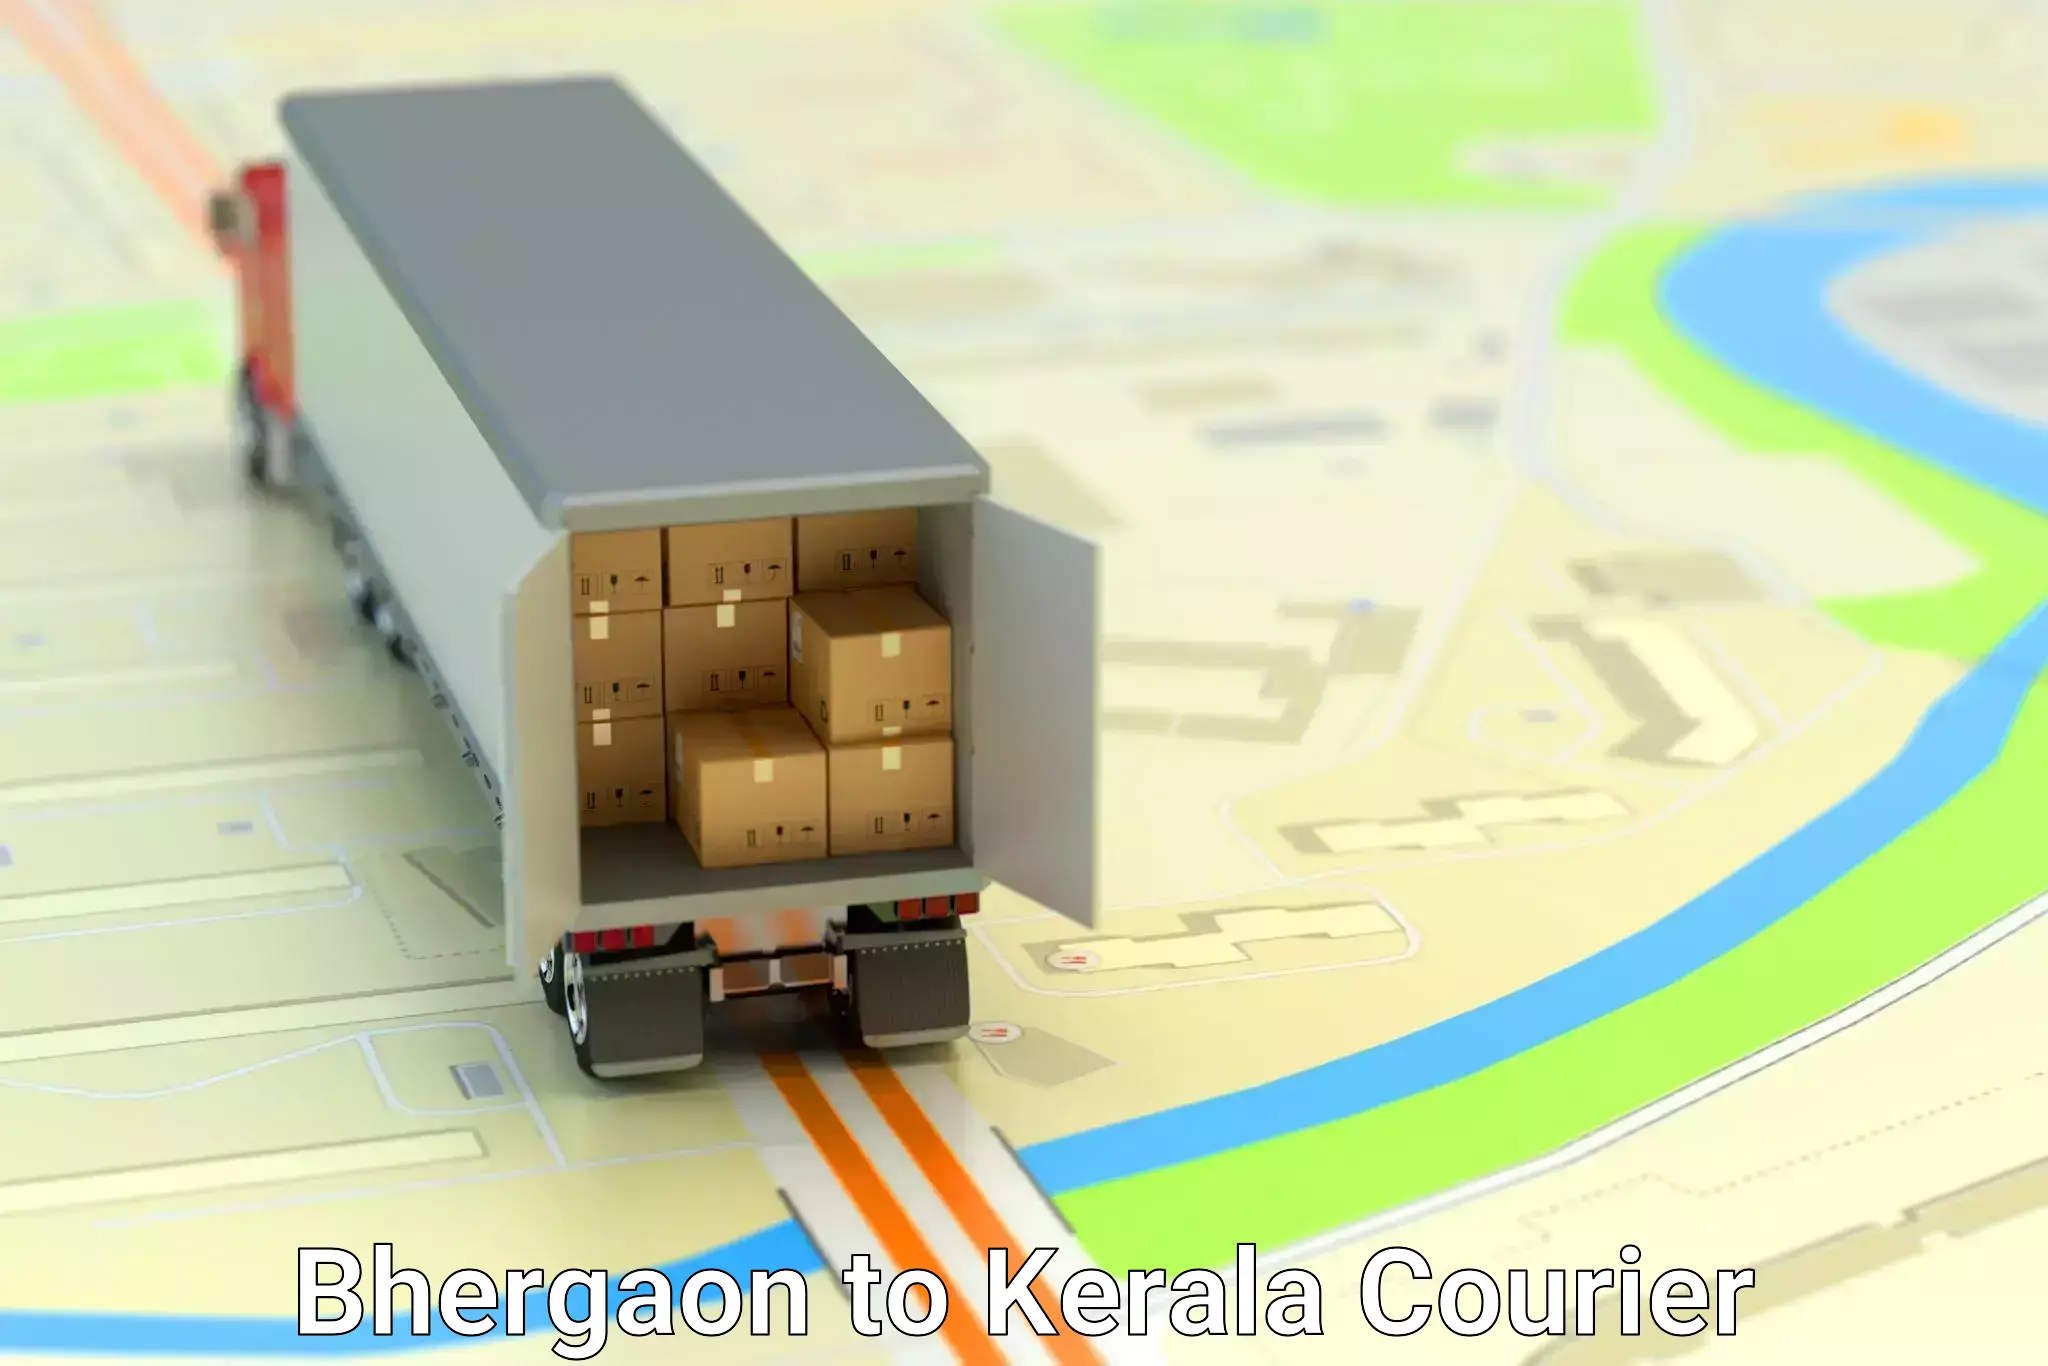 Global courier networks Bhergaon to Kerala